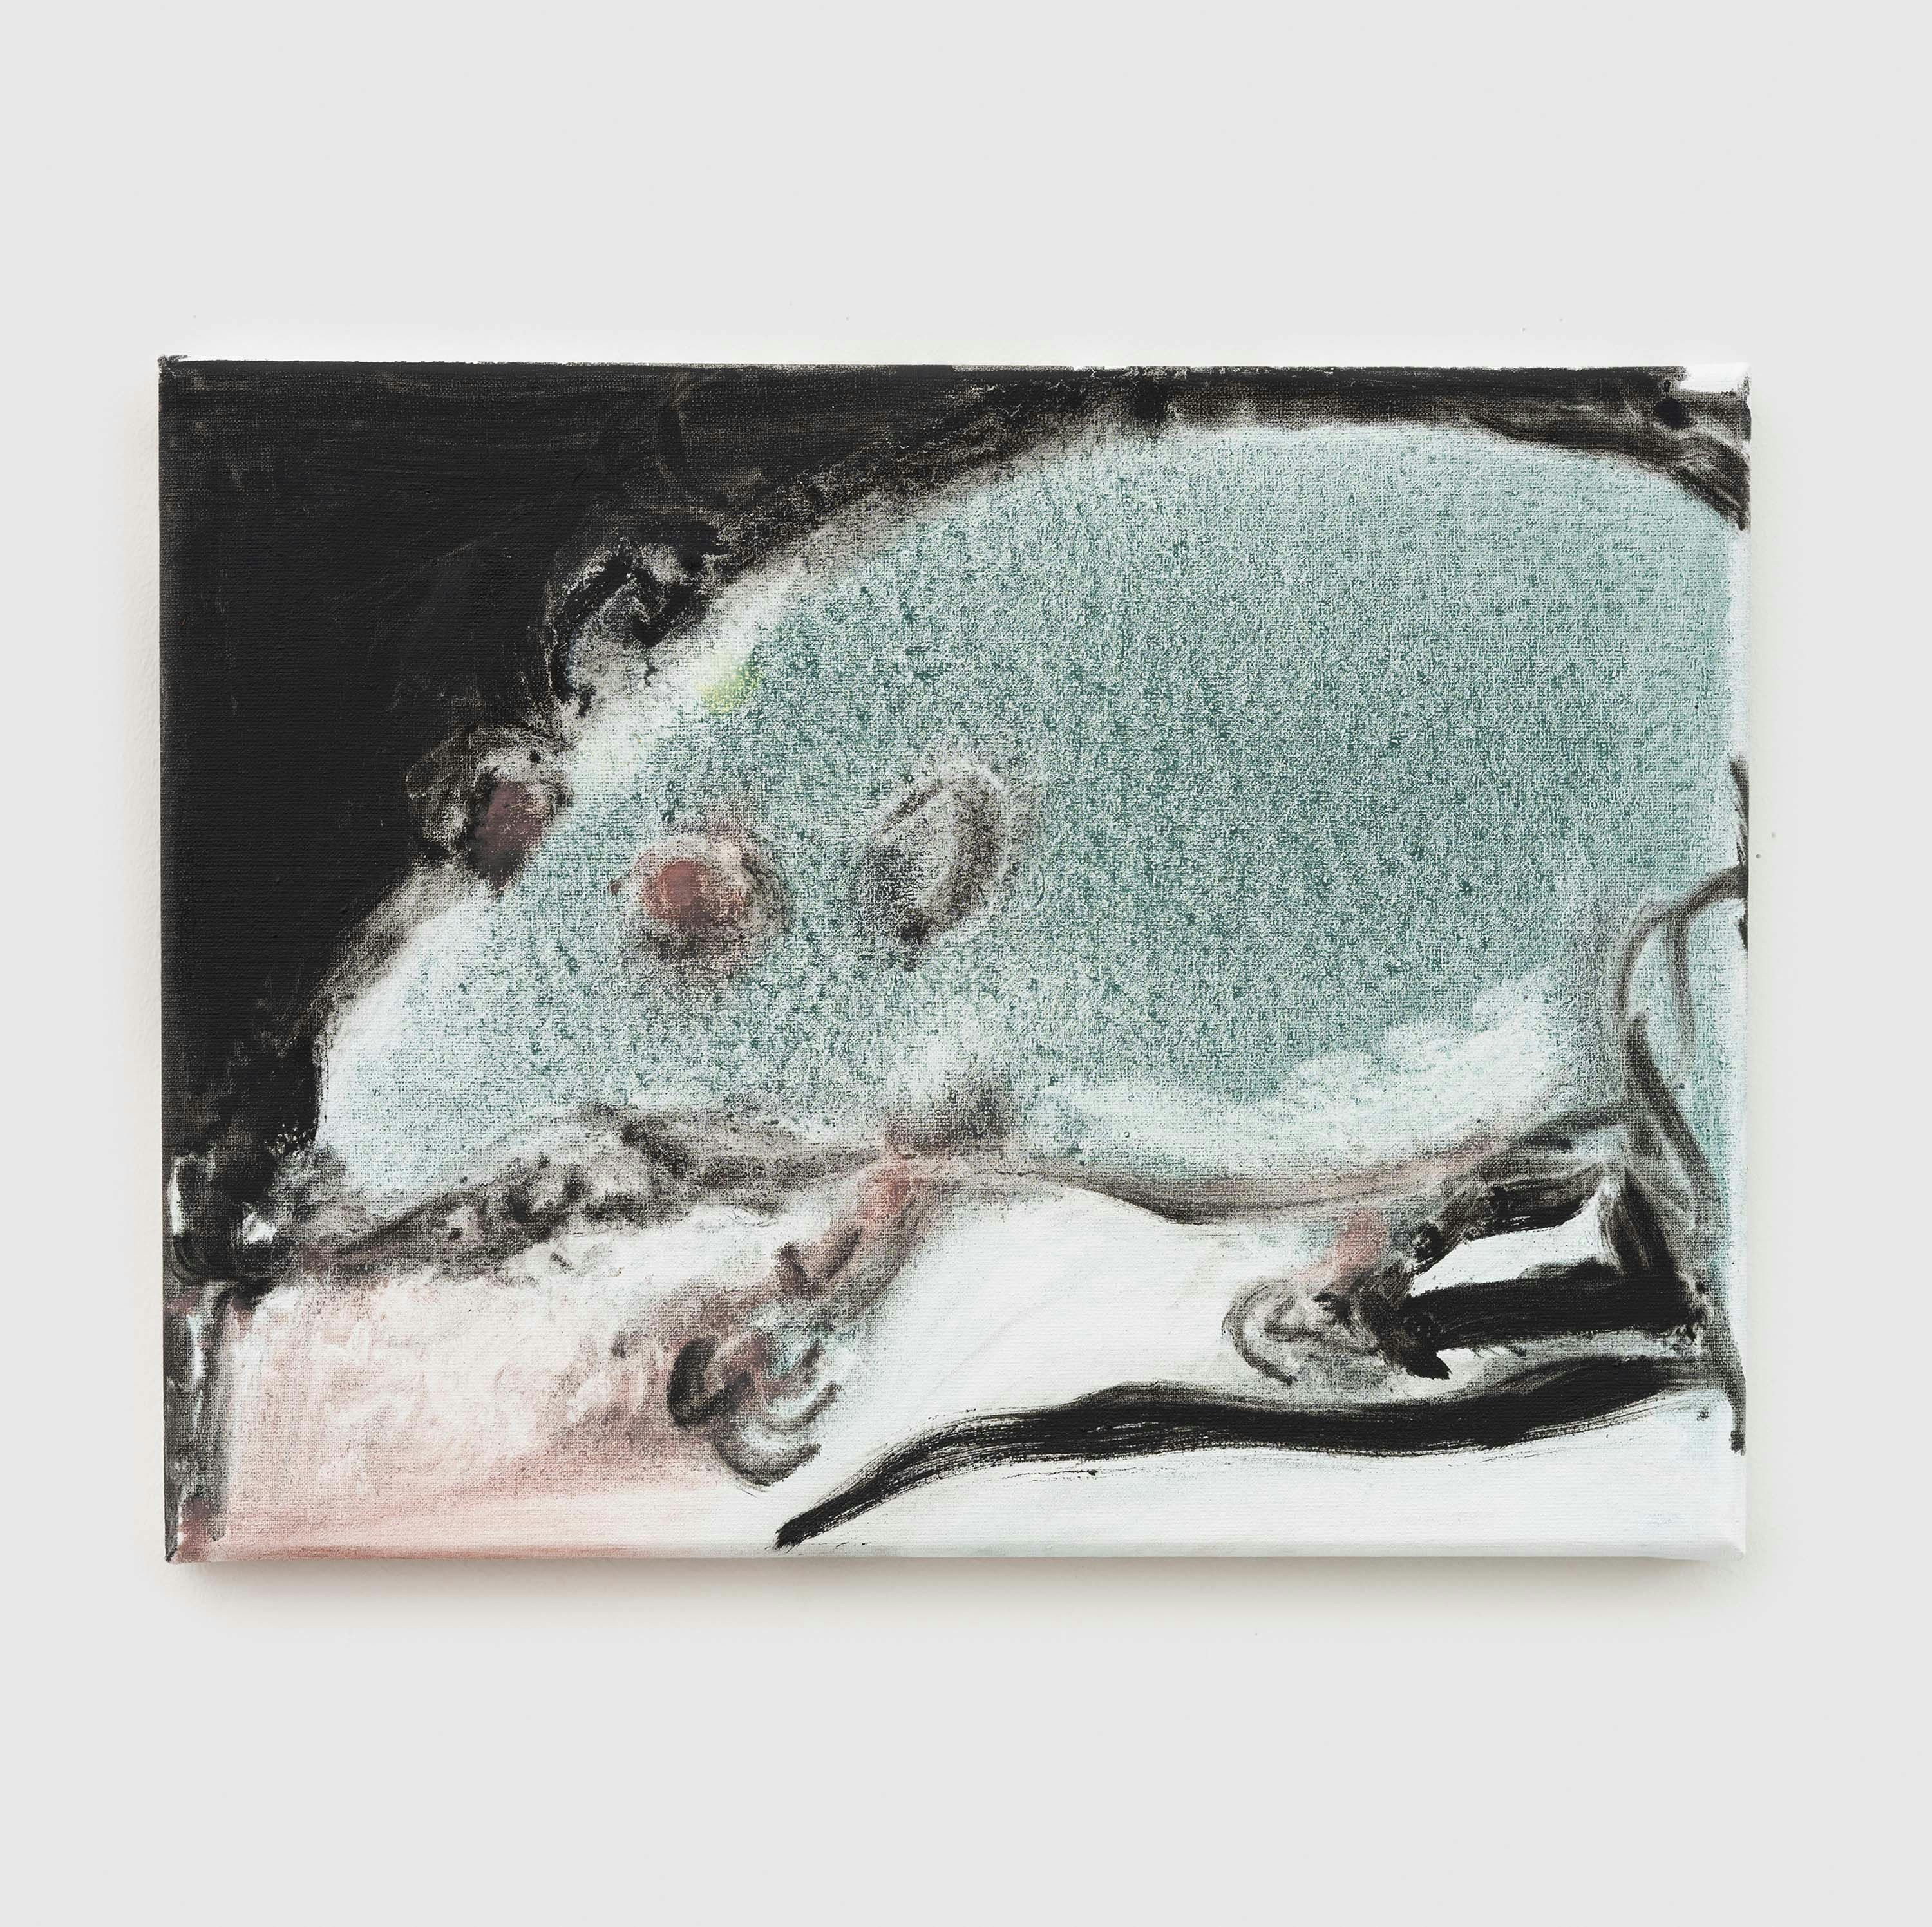 An oil on canvas painting by Marlene Dumas, titled Rat, dated 2020.